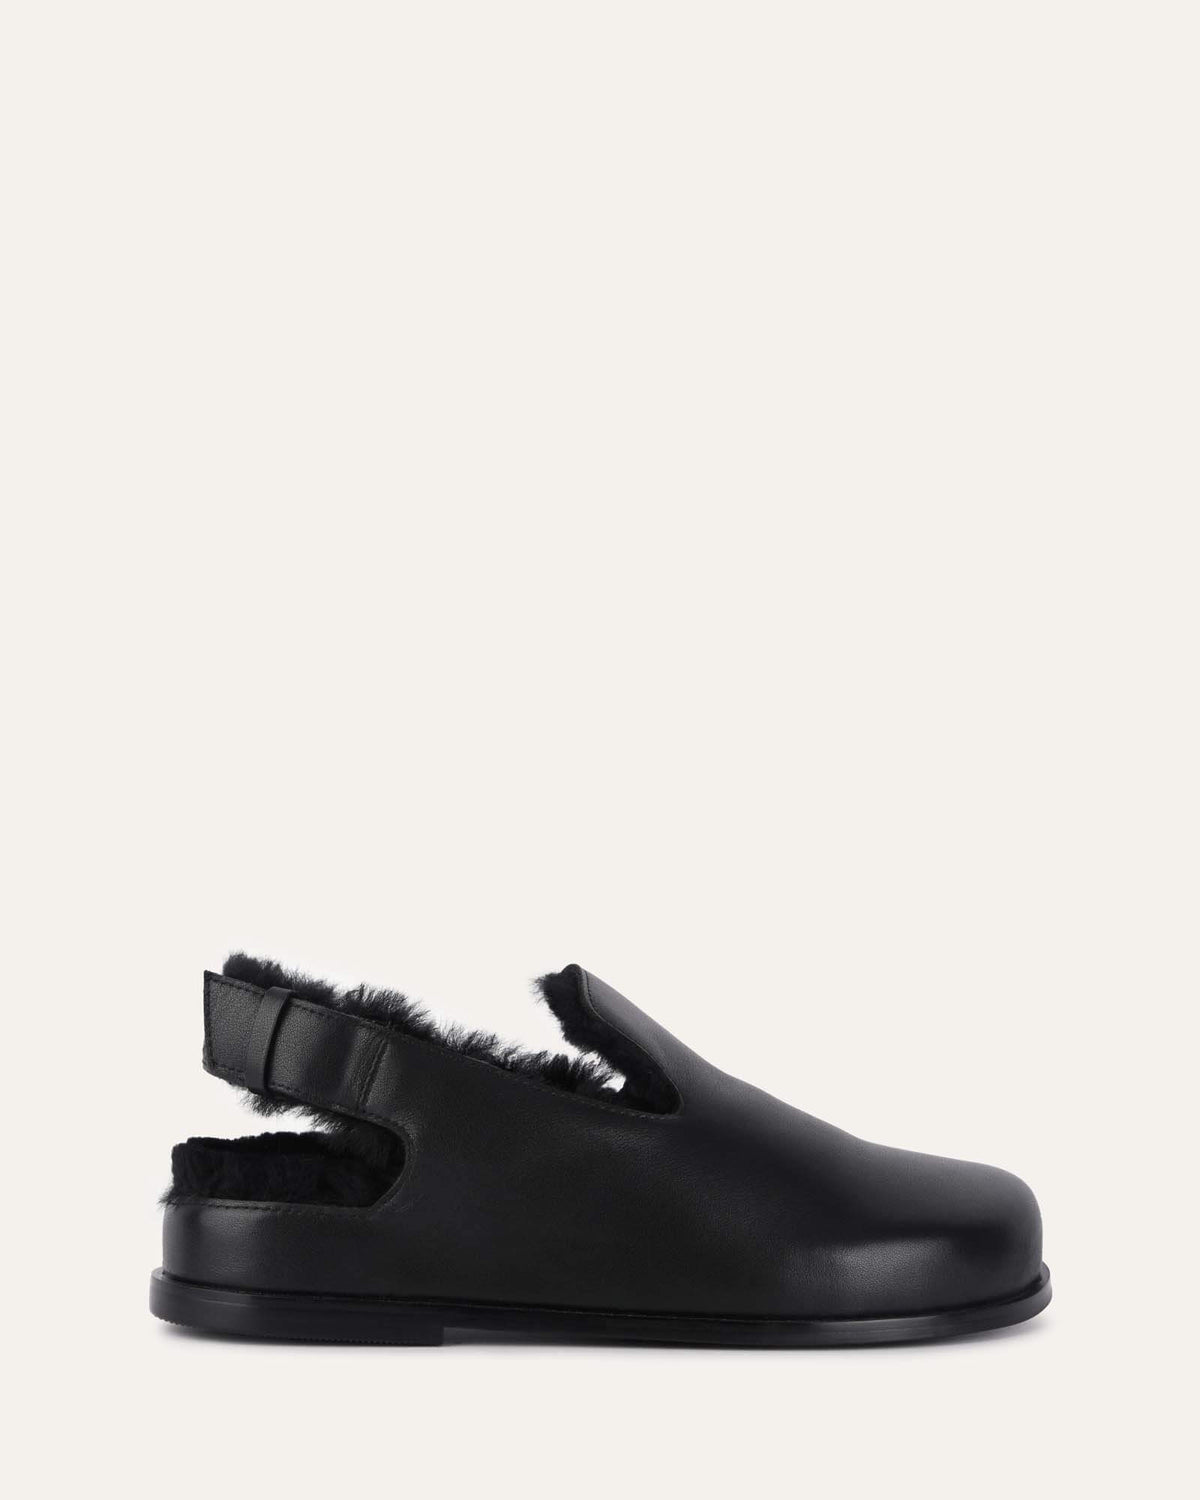 MEREDITH CASUAL FLATS BLACK LEATHER